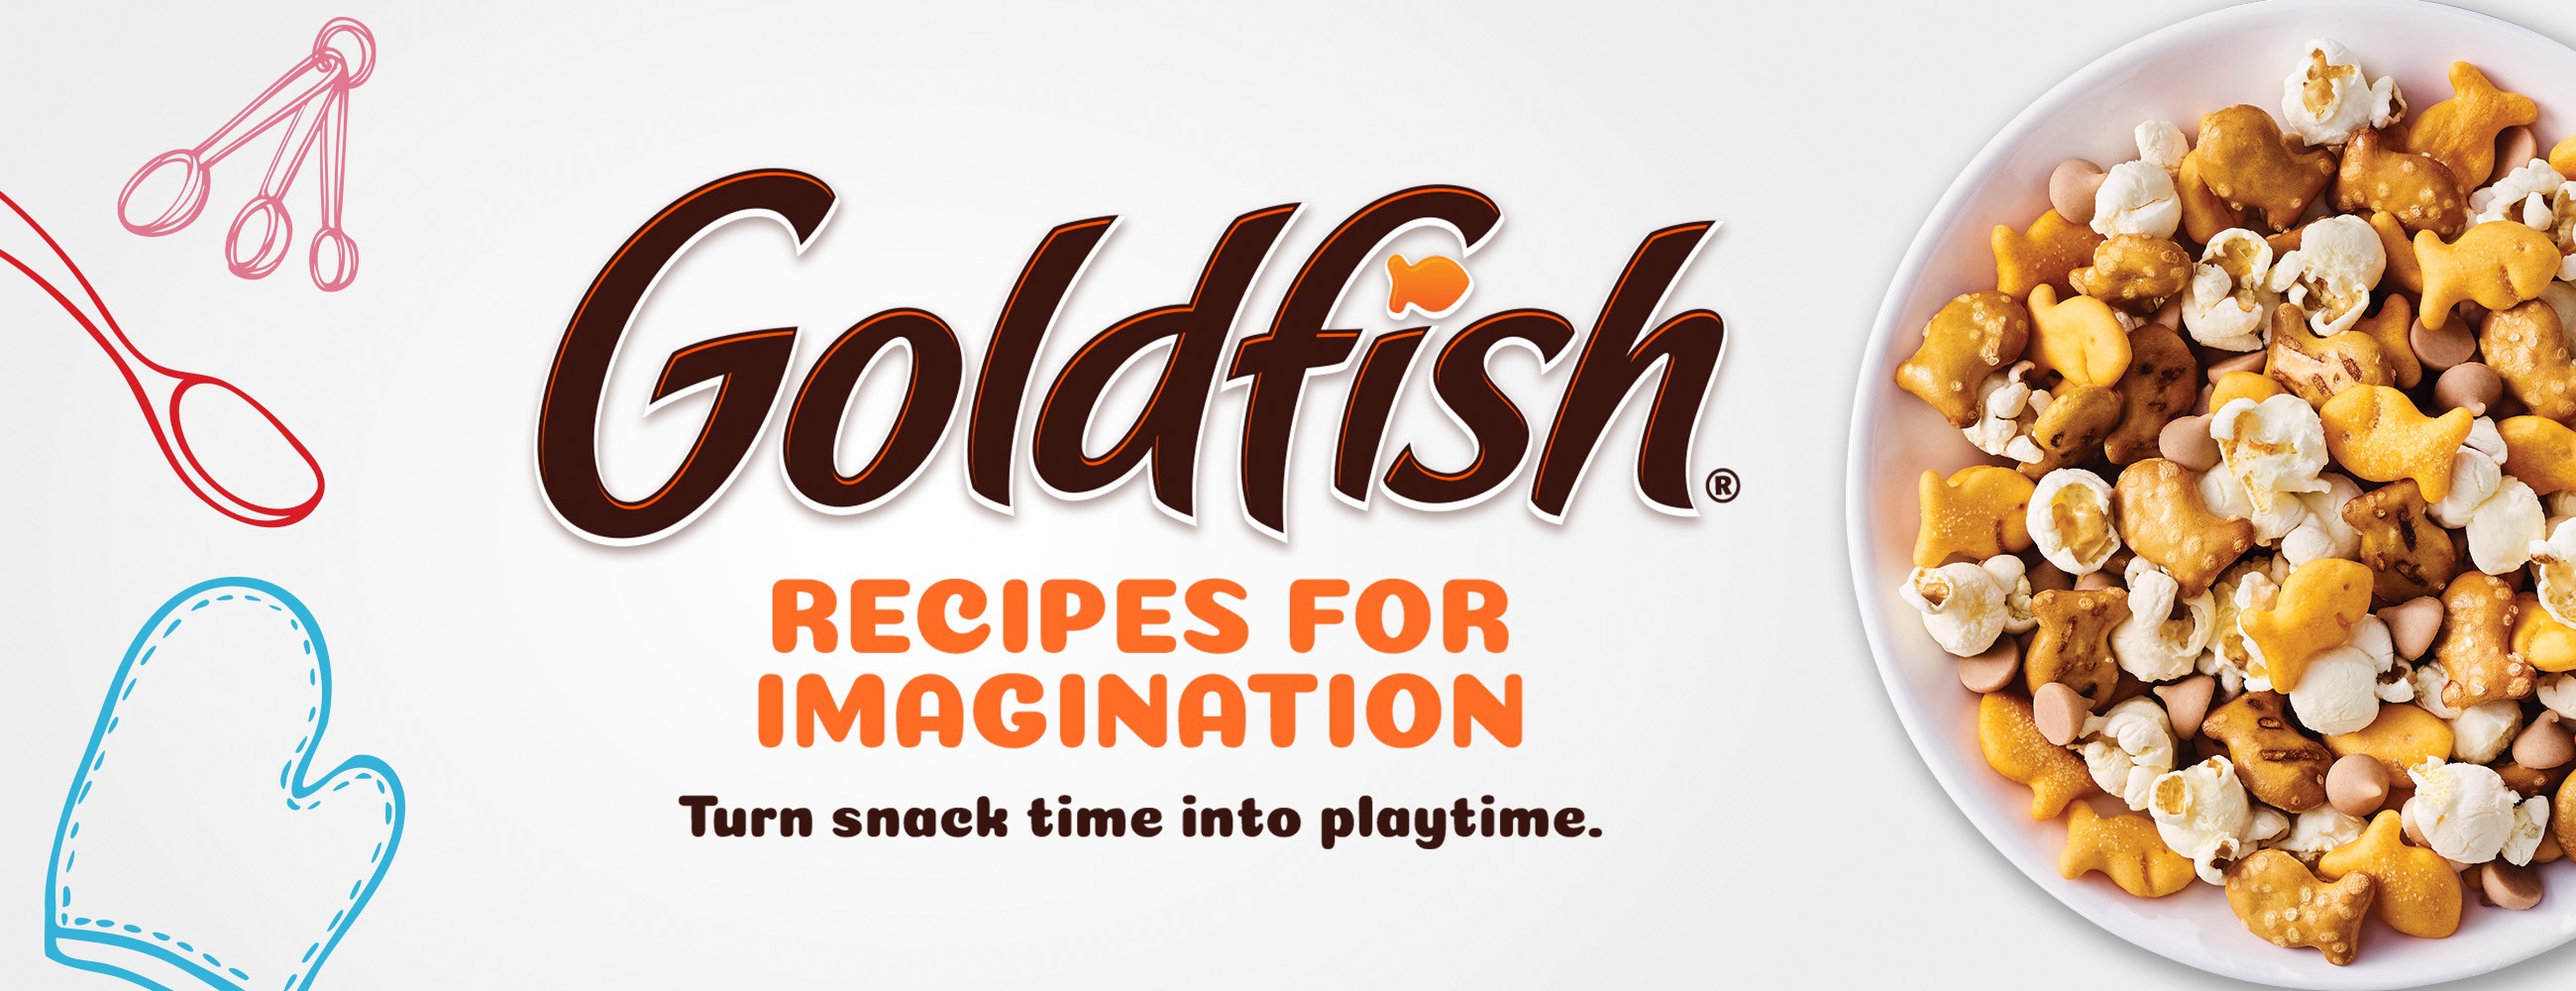 Goldfish® Recipes for Imagination | Turn snack time into playtime.